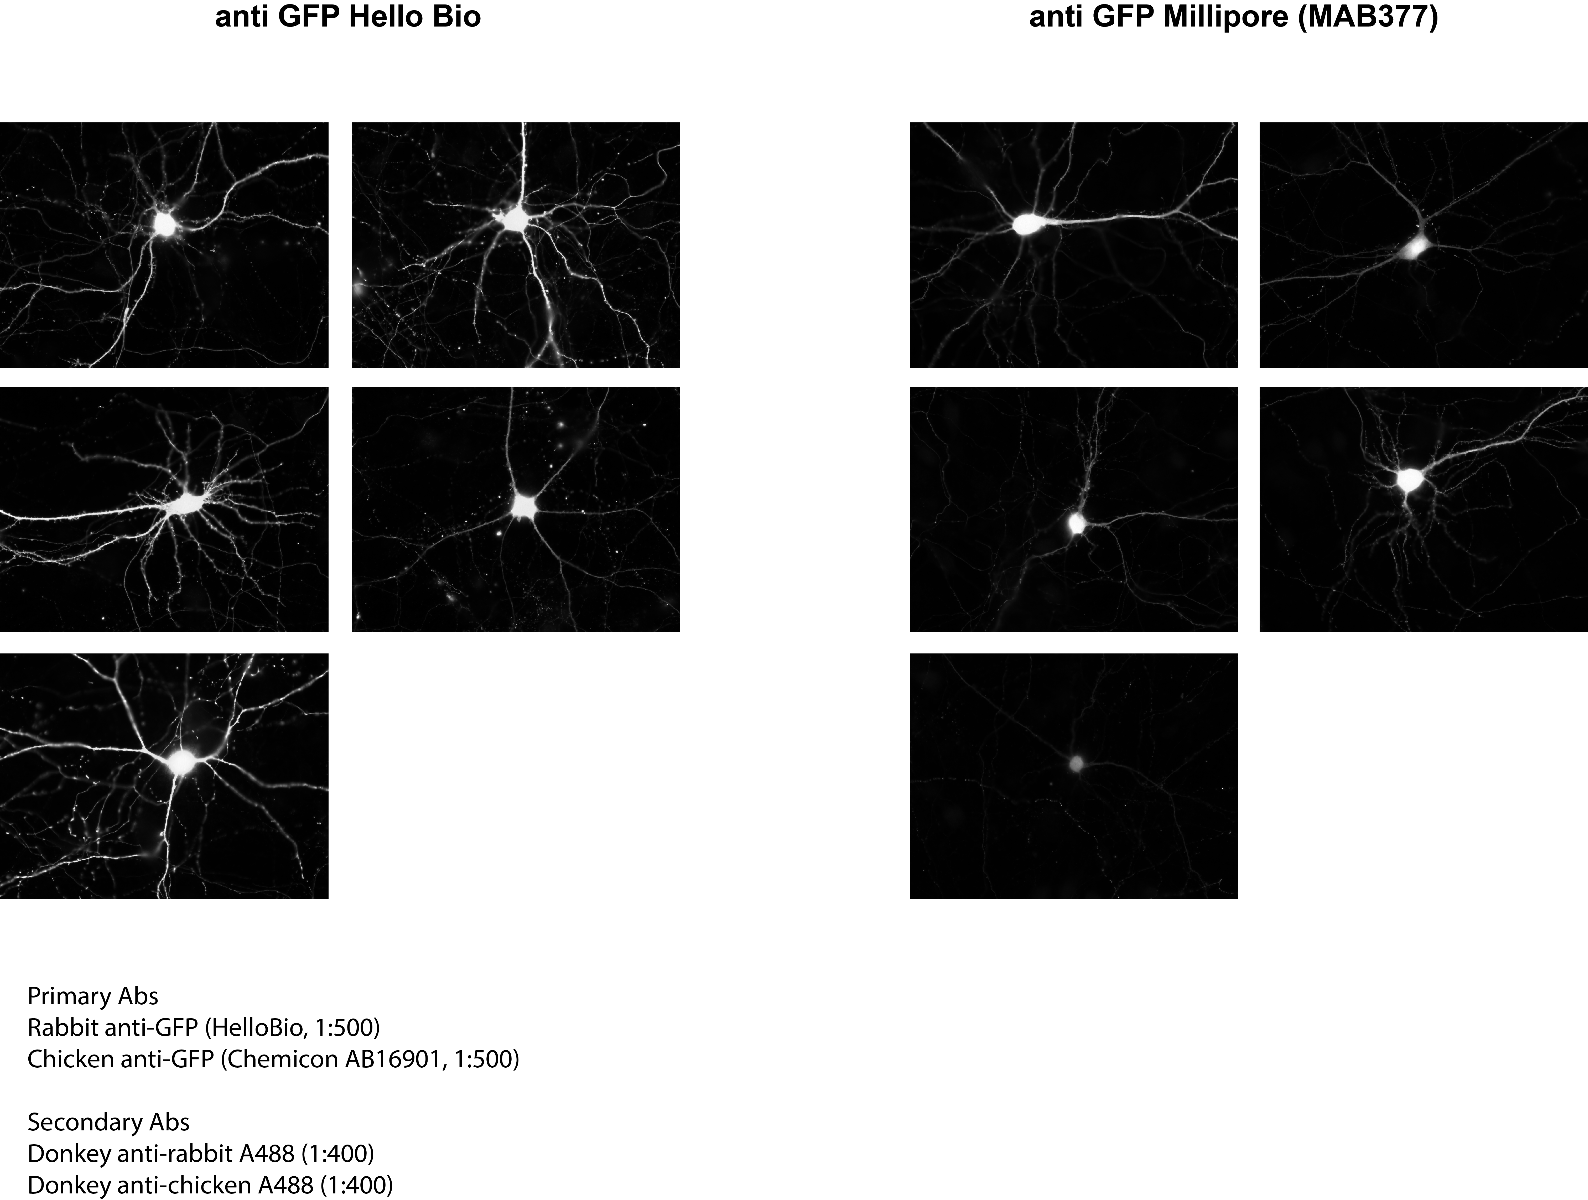 Figure 6. Comparison of HB8912 and Millipore MAB377 staining in GFP expressing neurons within mouse brain slices